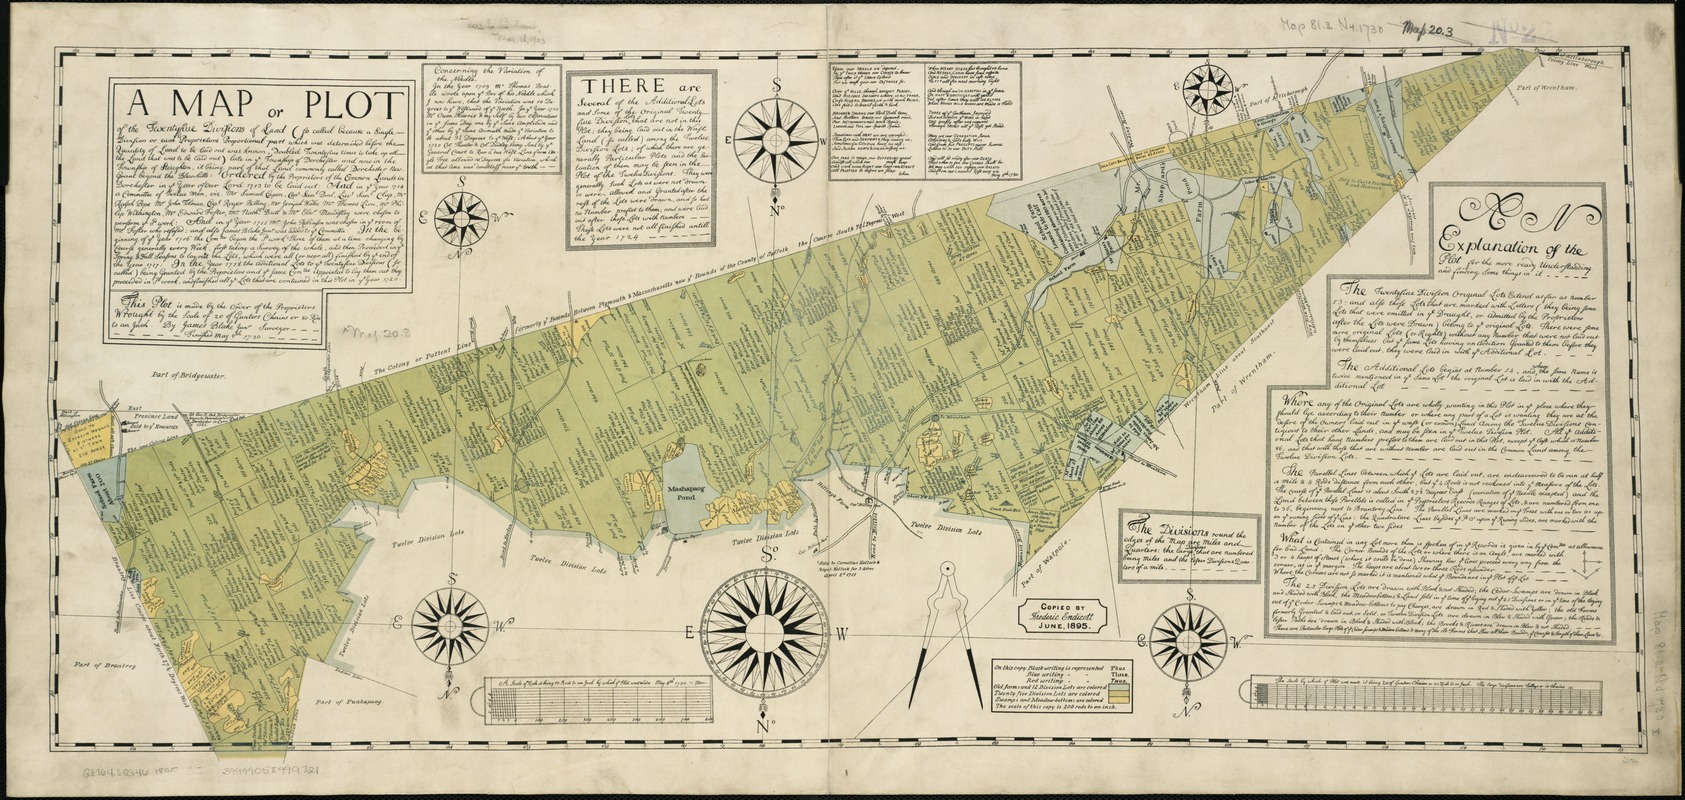 A map or plot of the twenty-five divisions of land ... late in the Township of Dorchester and now in the Township of Stoughton, it being part of that land commonly called Dorchester New-Grant beyond the Blew-hills ... finished May 8th, 1730